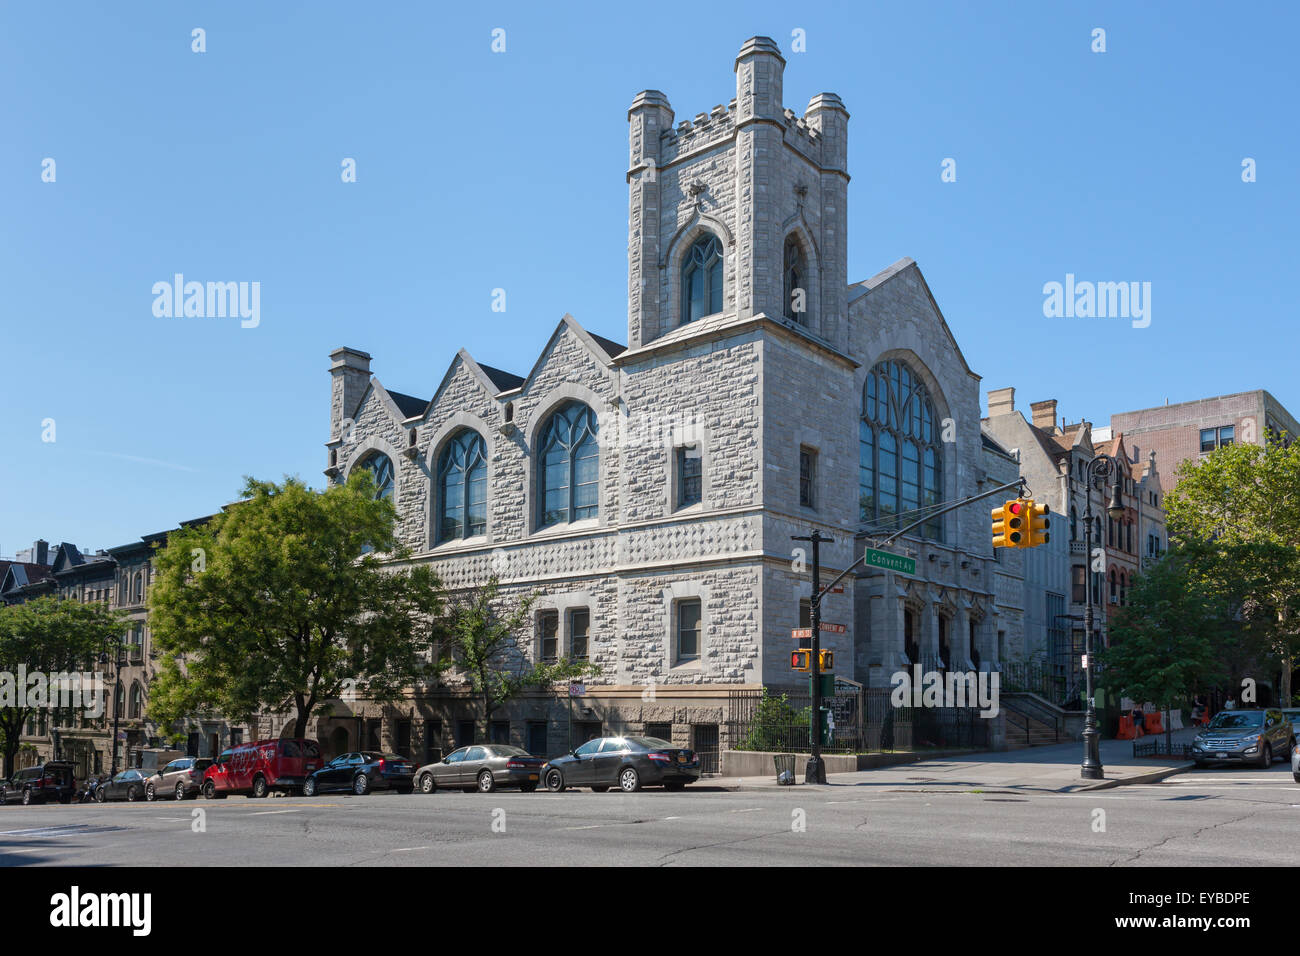 Convent Avenue Baptist Church in Hamilton Heights / West Harlem in New York City. Stockfoto